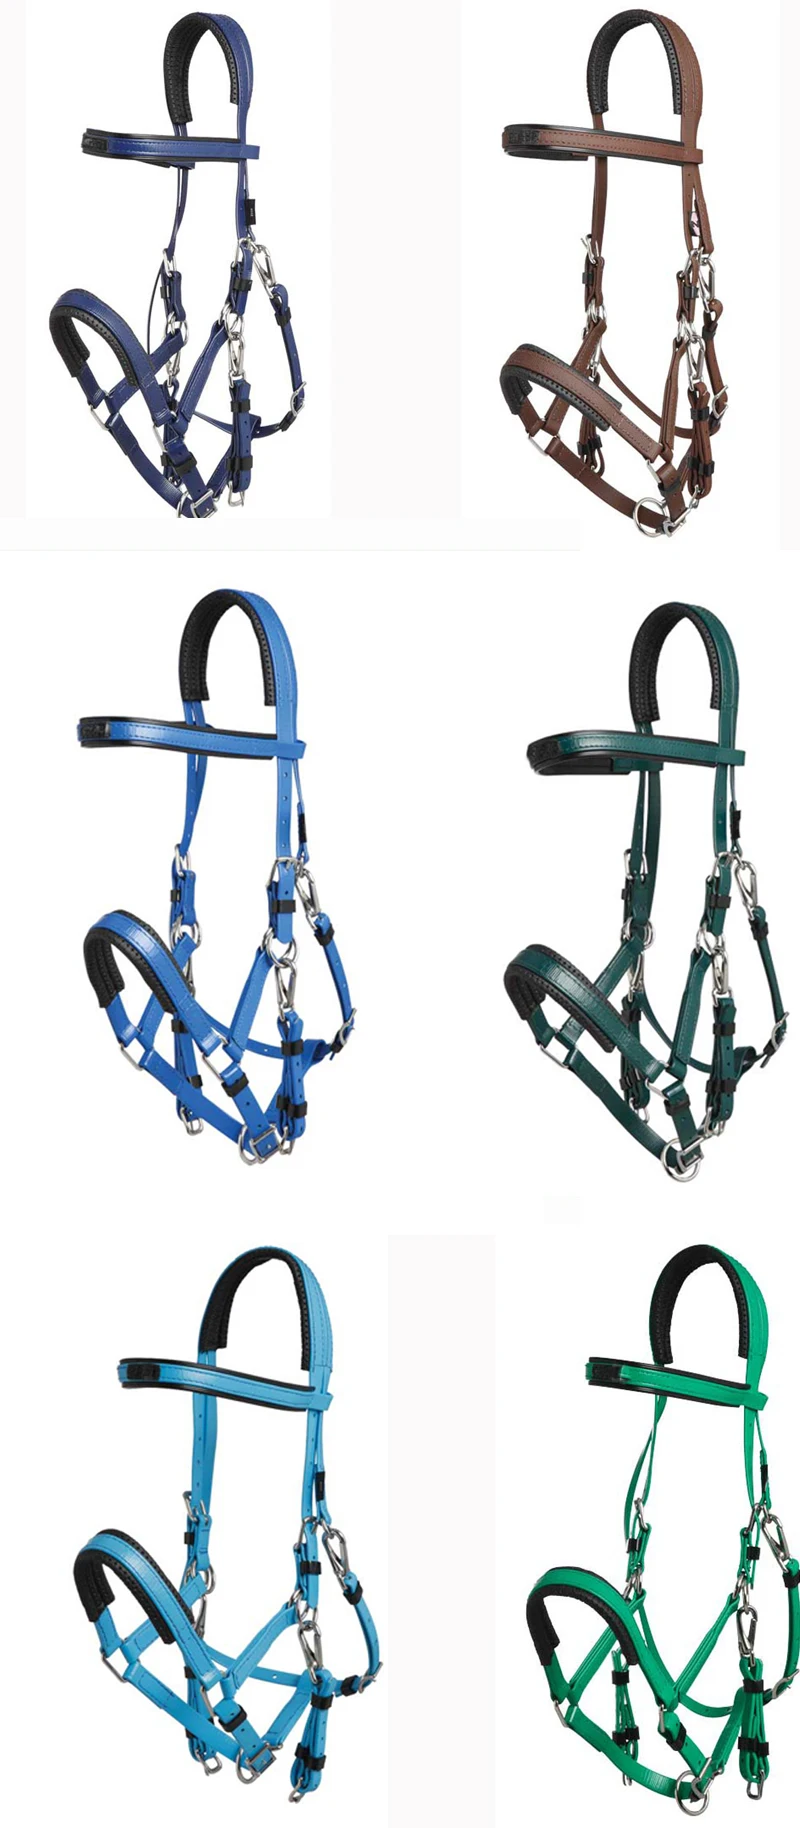 Colorful Adjustable Horse Racing Equestrian Bridle - Buy Colorful Horse ...